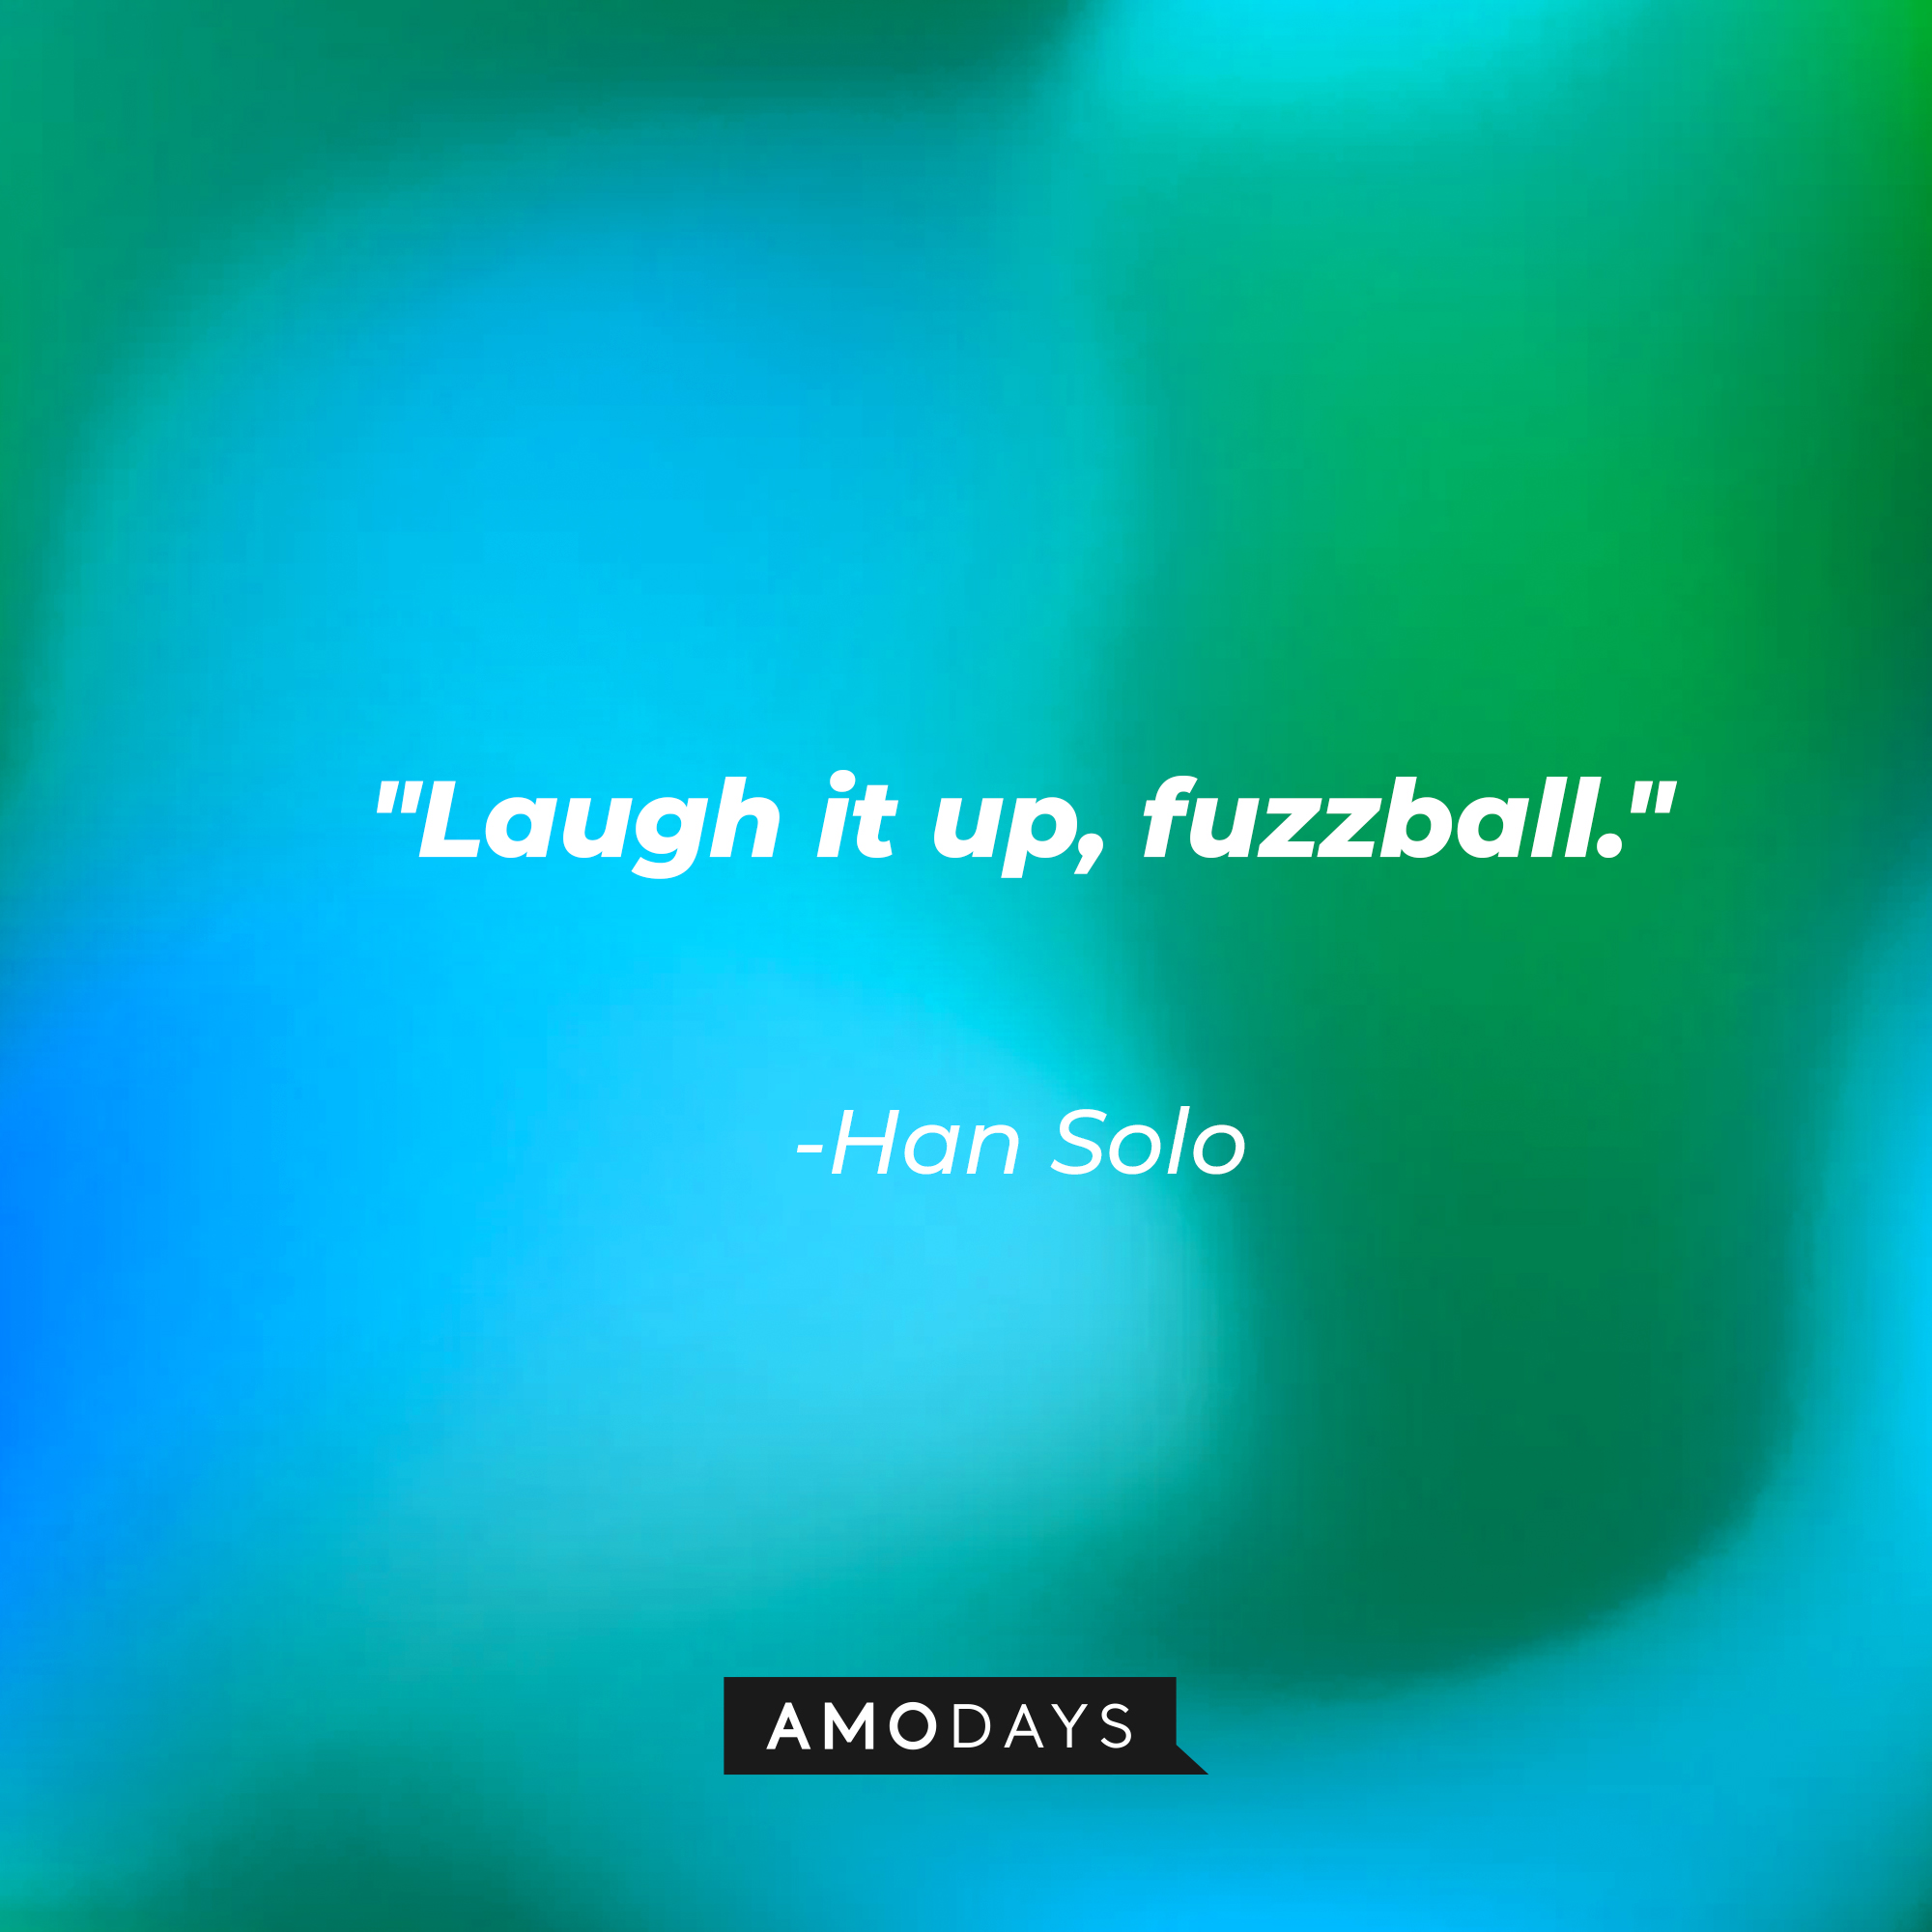 Hans Solo's quote: "Laugh it up, fuzzball." | Source: AmoDays